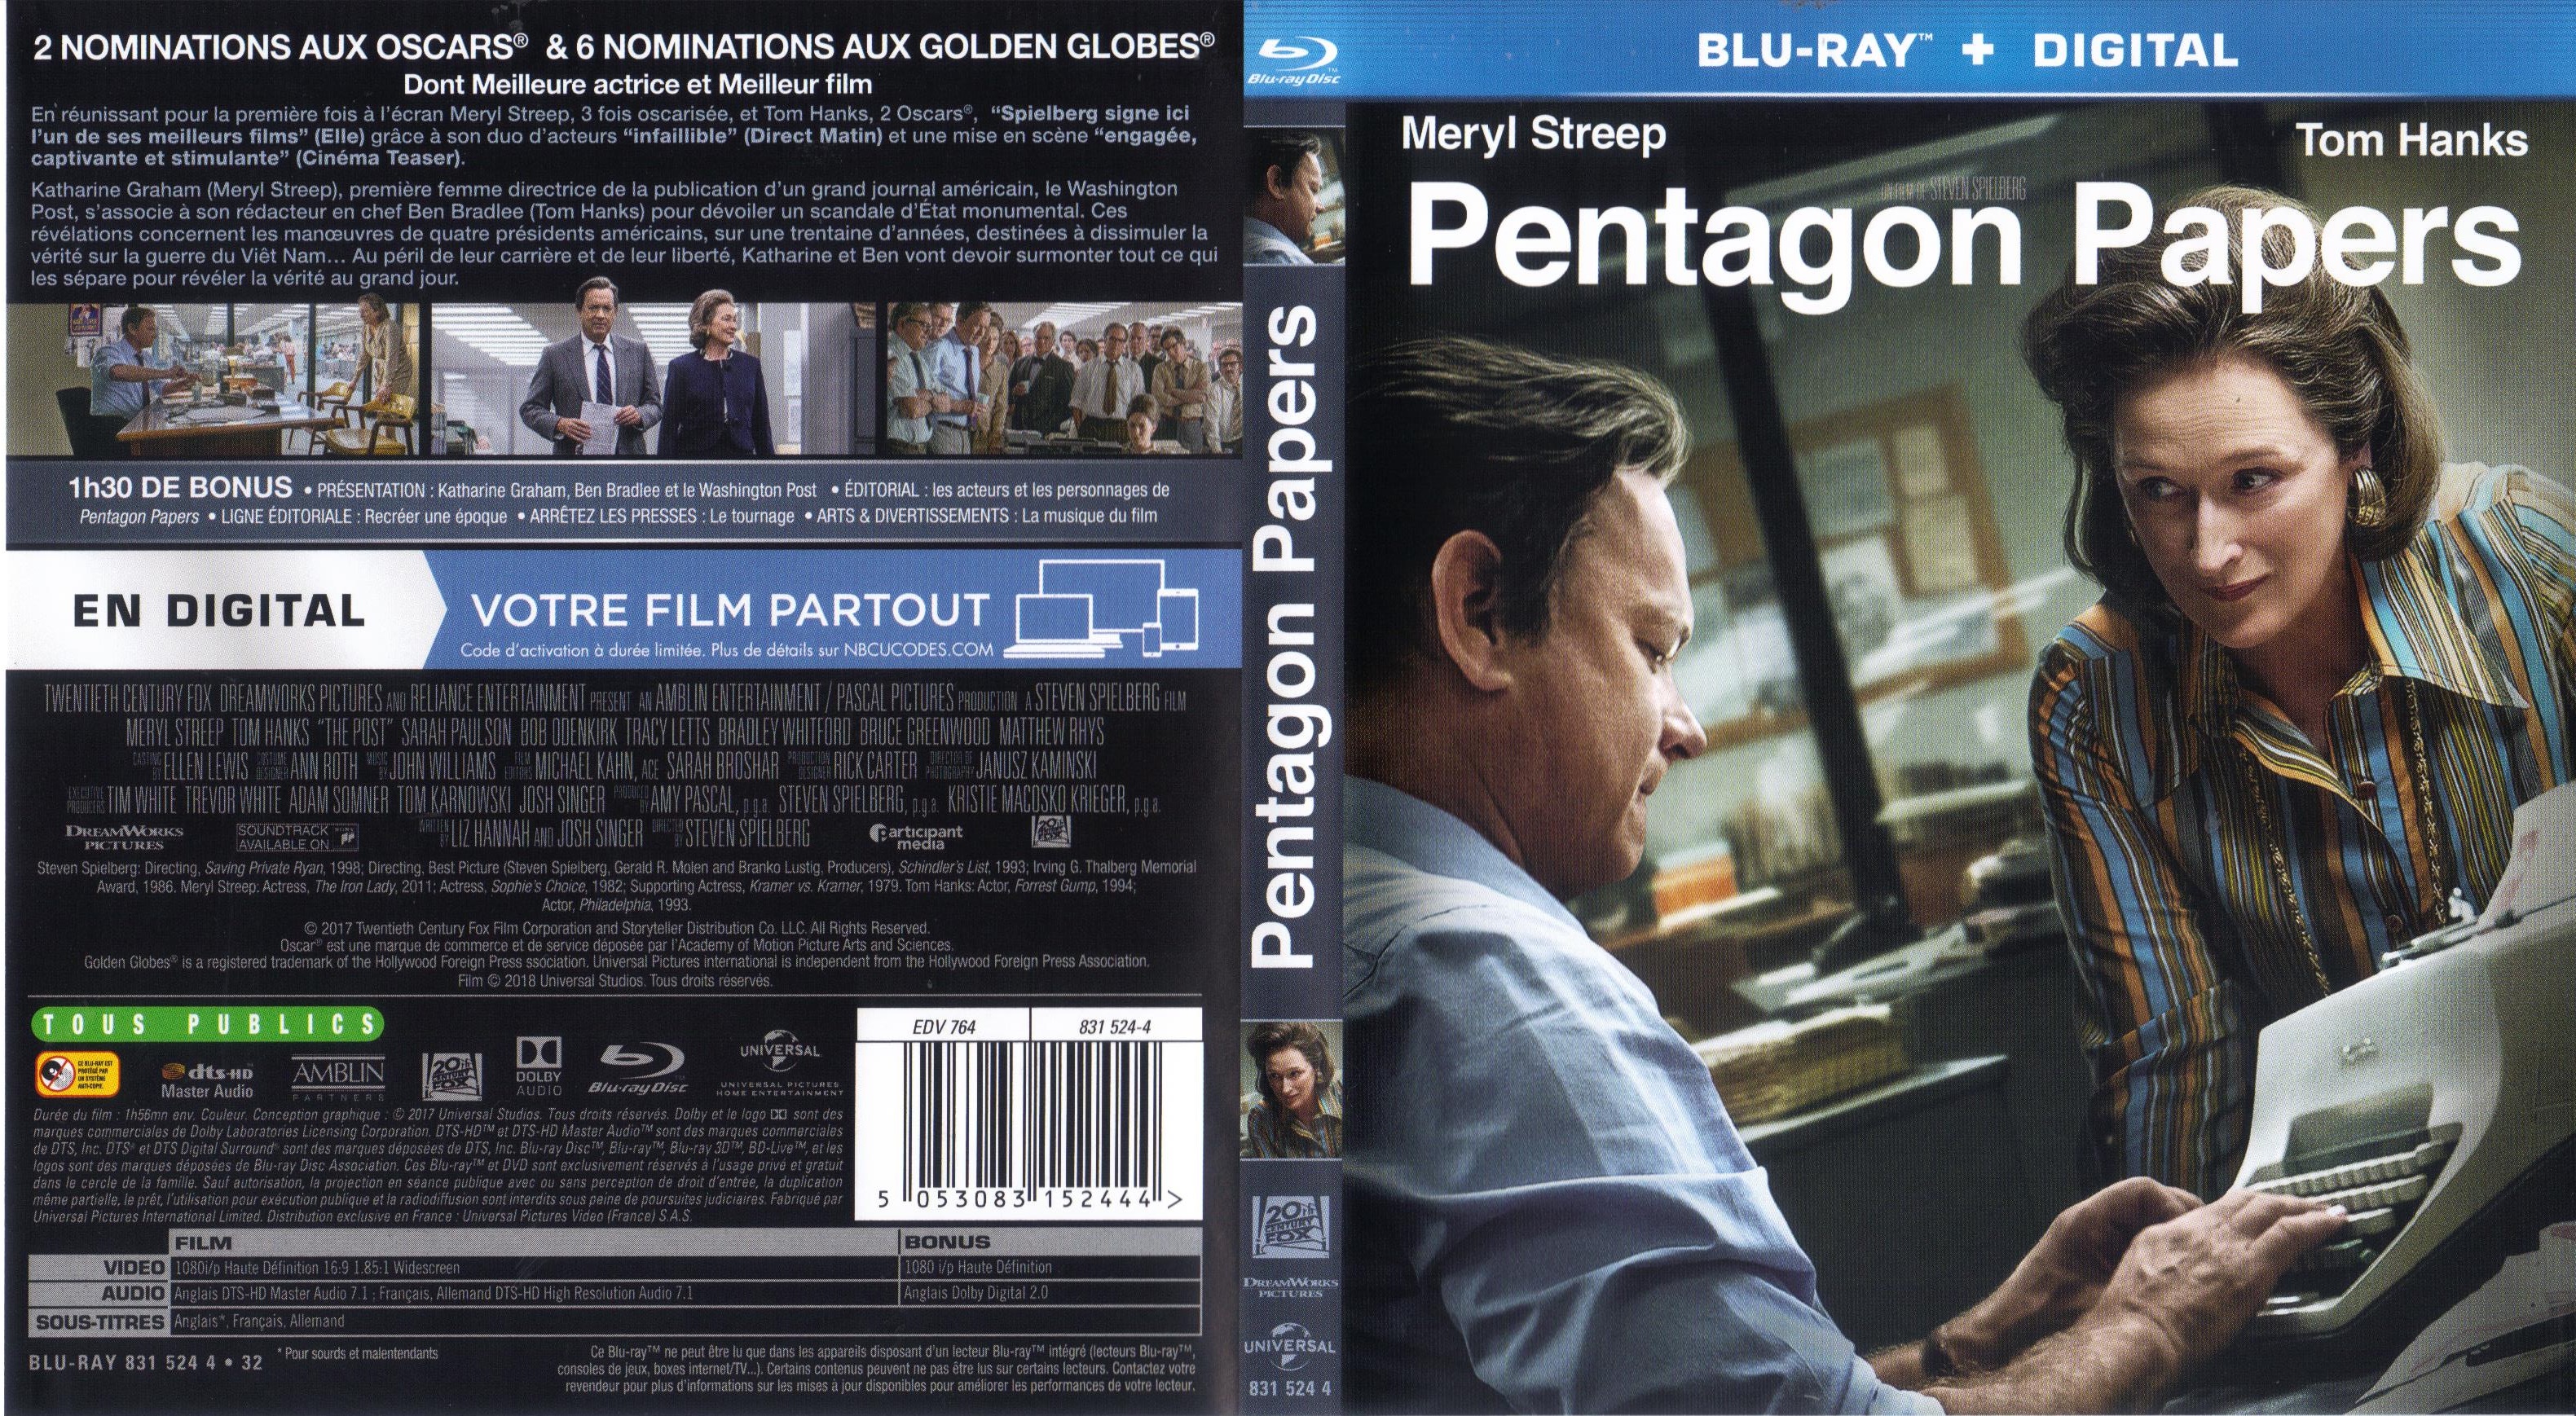 Jaquette DVD Pentagon papers (BLU-RAY) v2